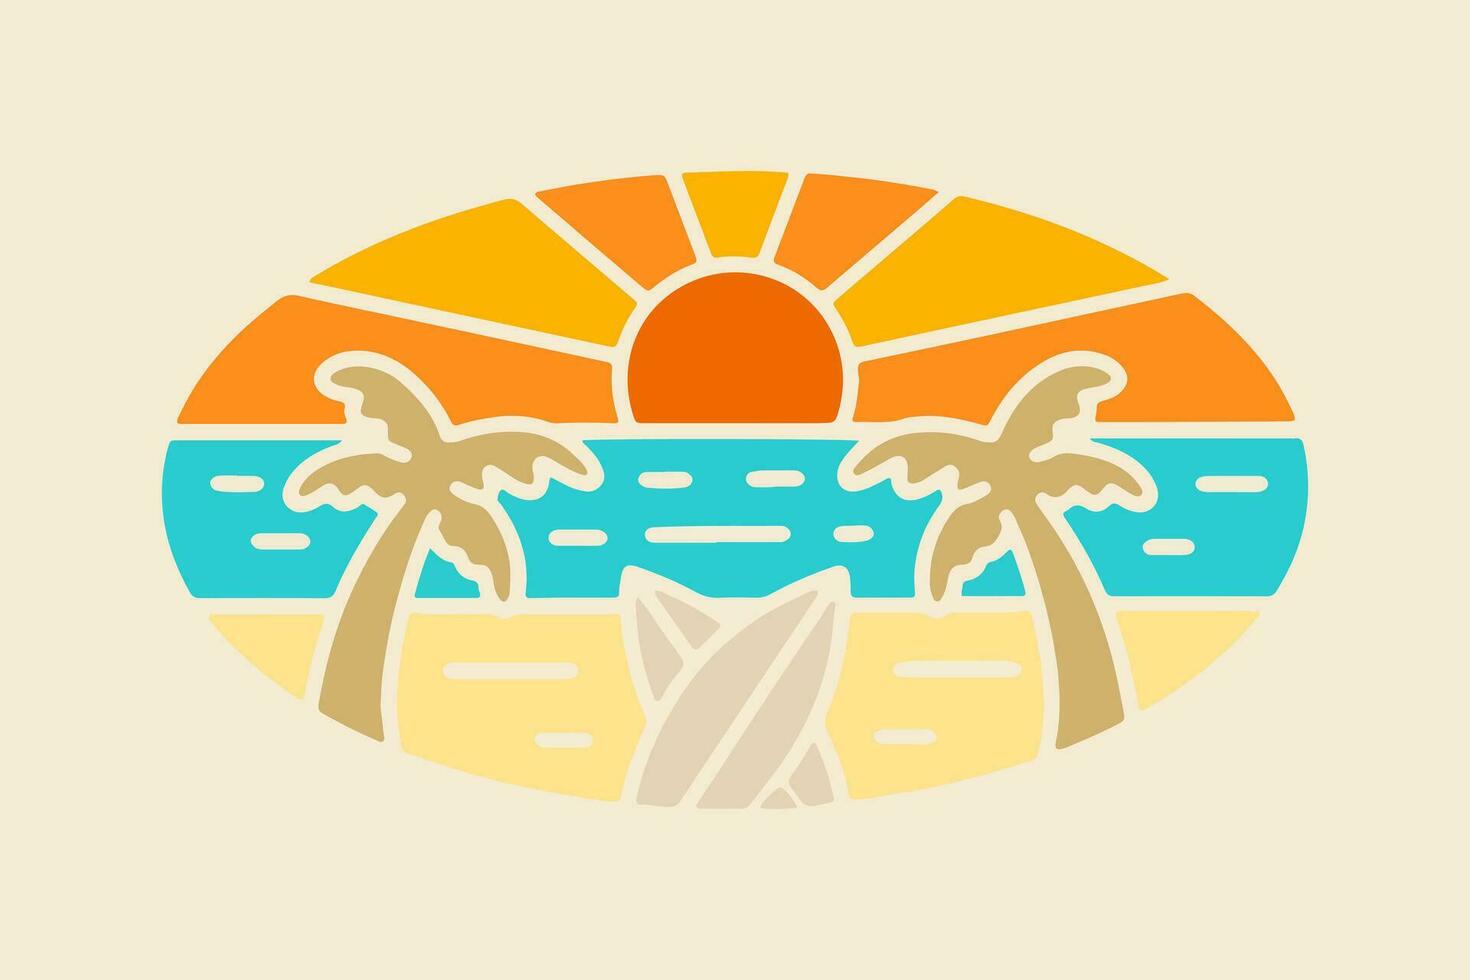 The sunset on the beach in mono line vector design for t-shirt, badge, and sticker vector illustration